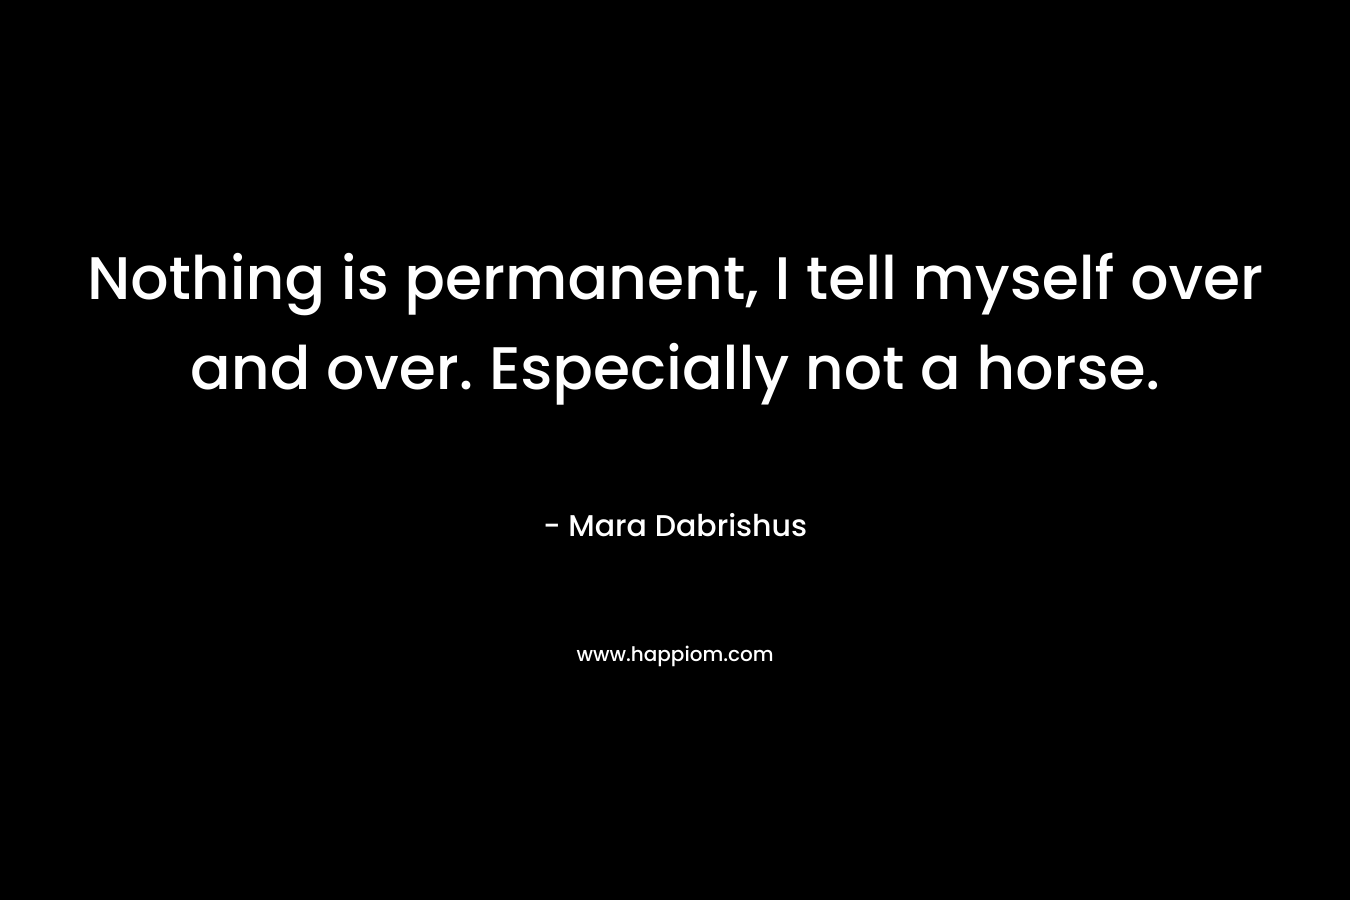 Nothing is permanent, I tell myself over and over. Especially not a horse.